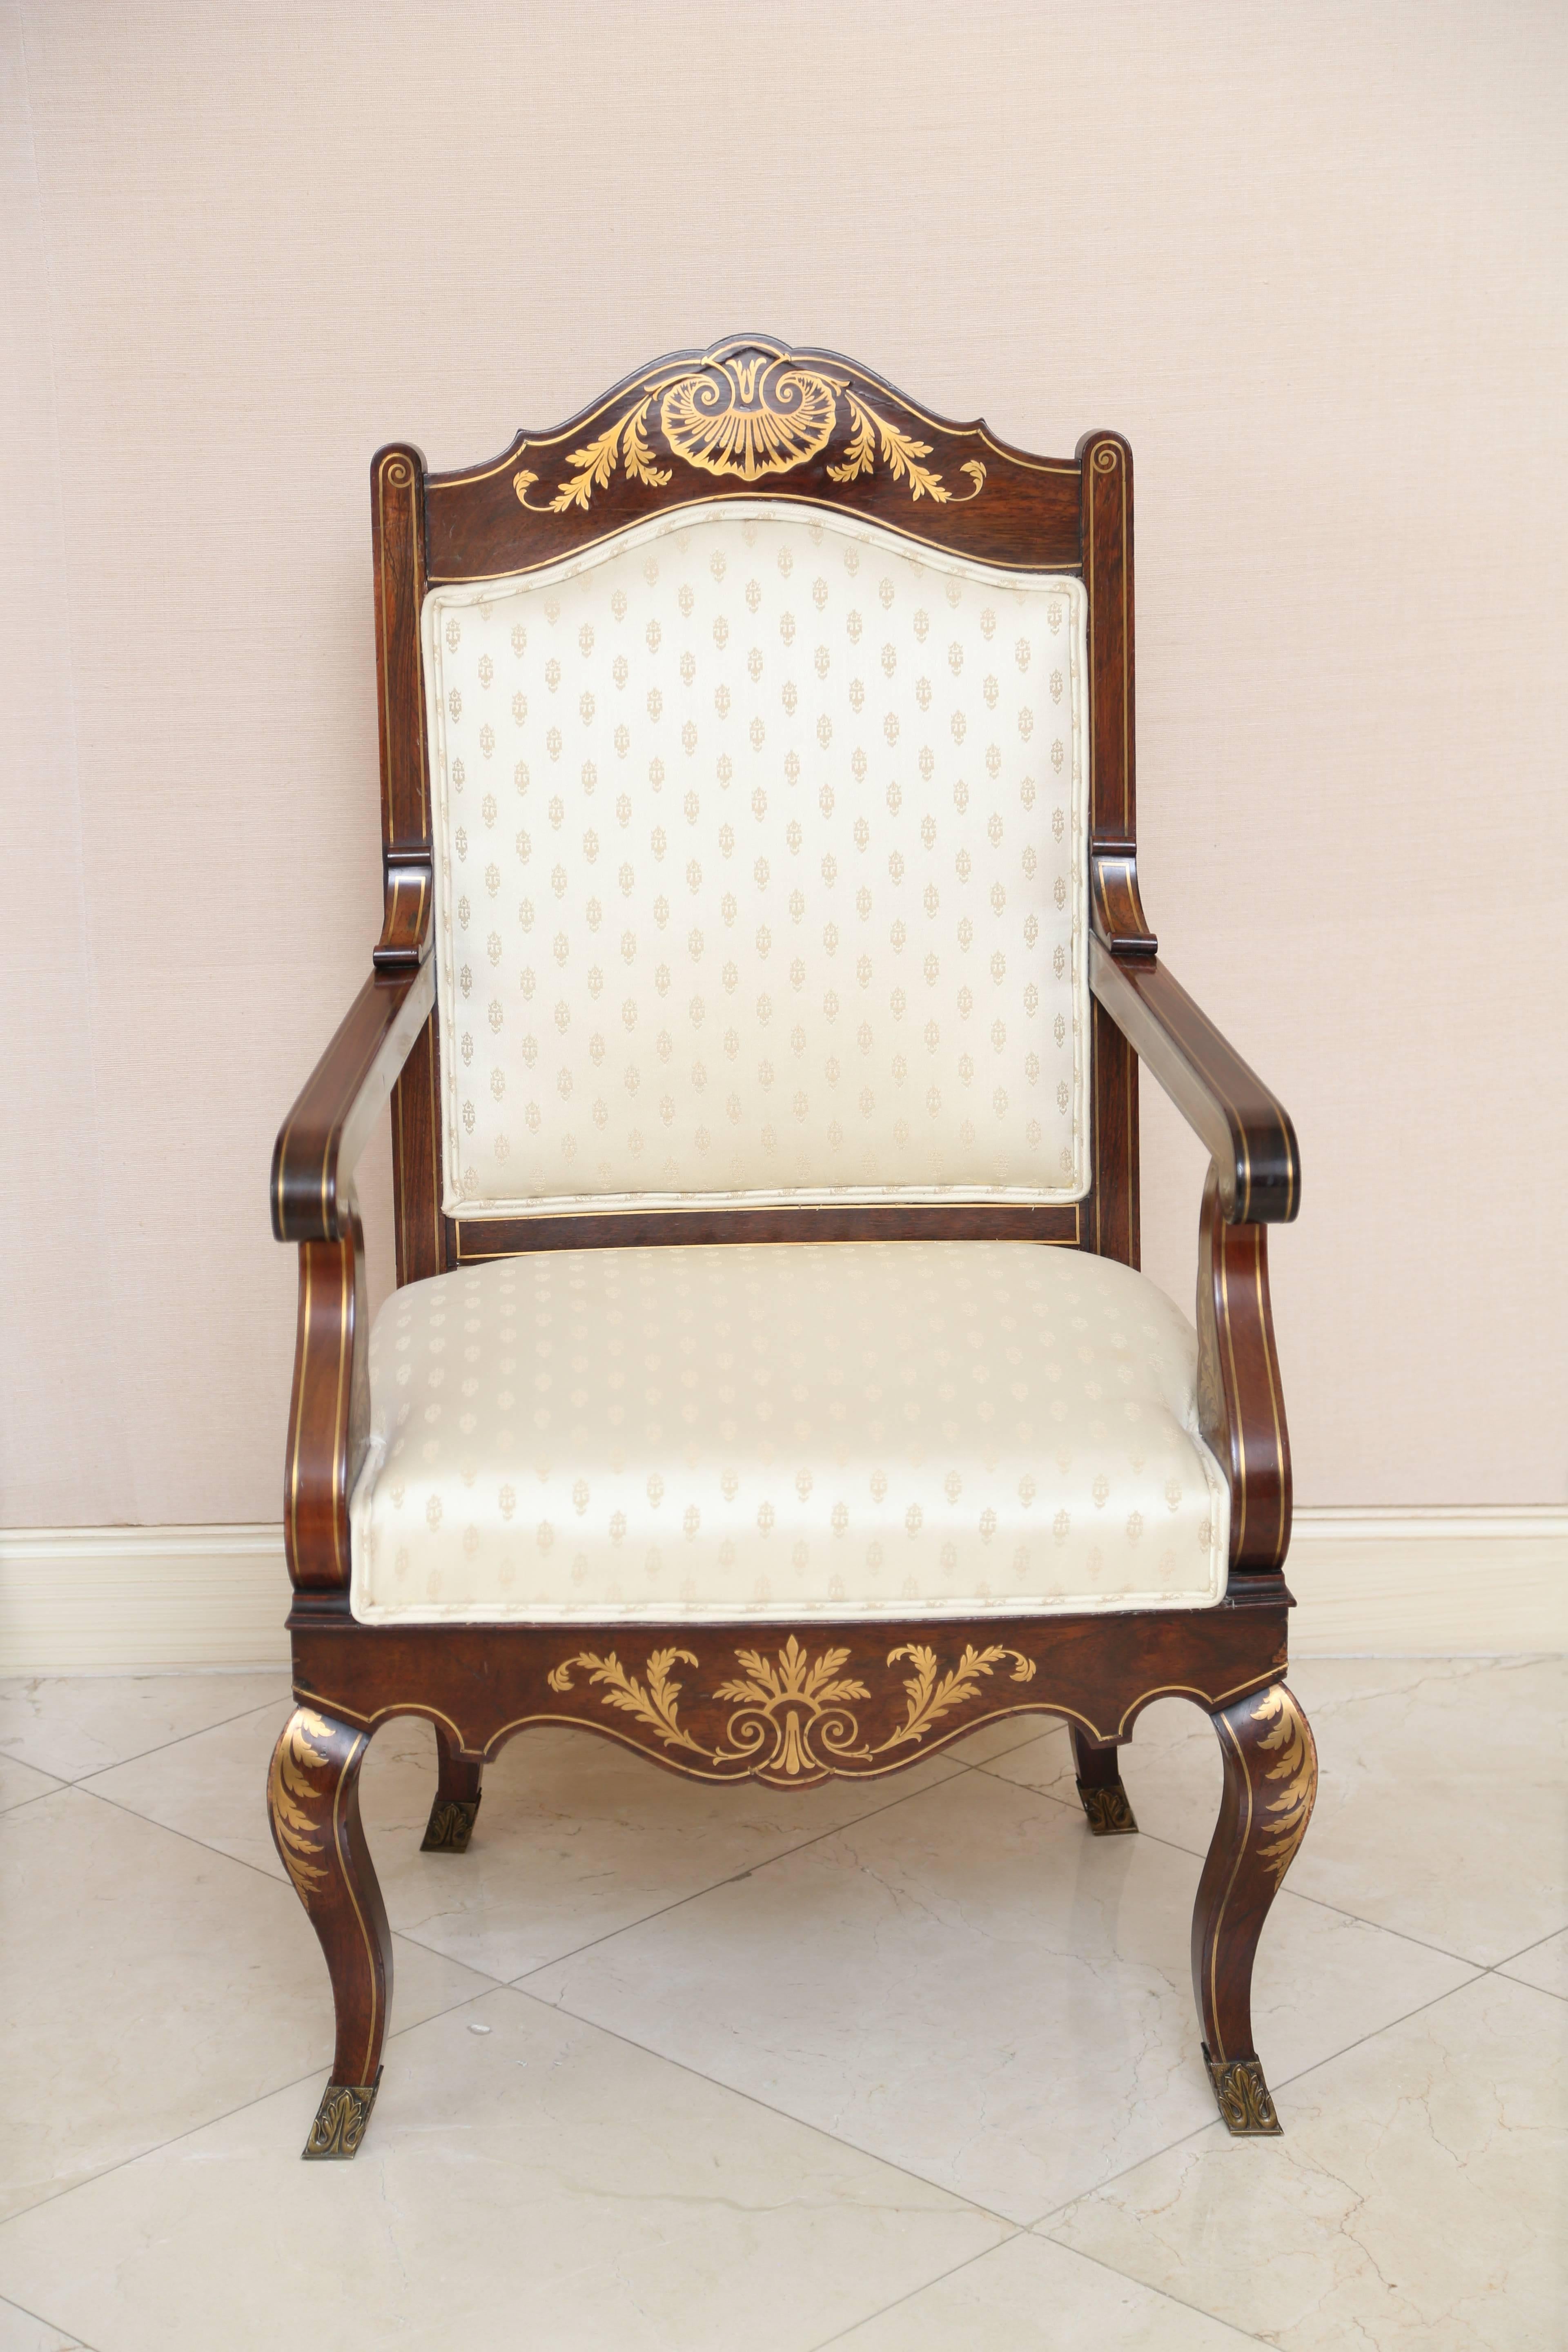 Each upholstered back with arched crest rail centered by a brass-inlaid shell issuing foliate sprays; the over-upholstered seat with shaped sear rail centered by a sheet sheath; raised ob cabriole legs terminating in sabot; with brass line inlay